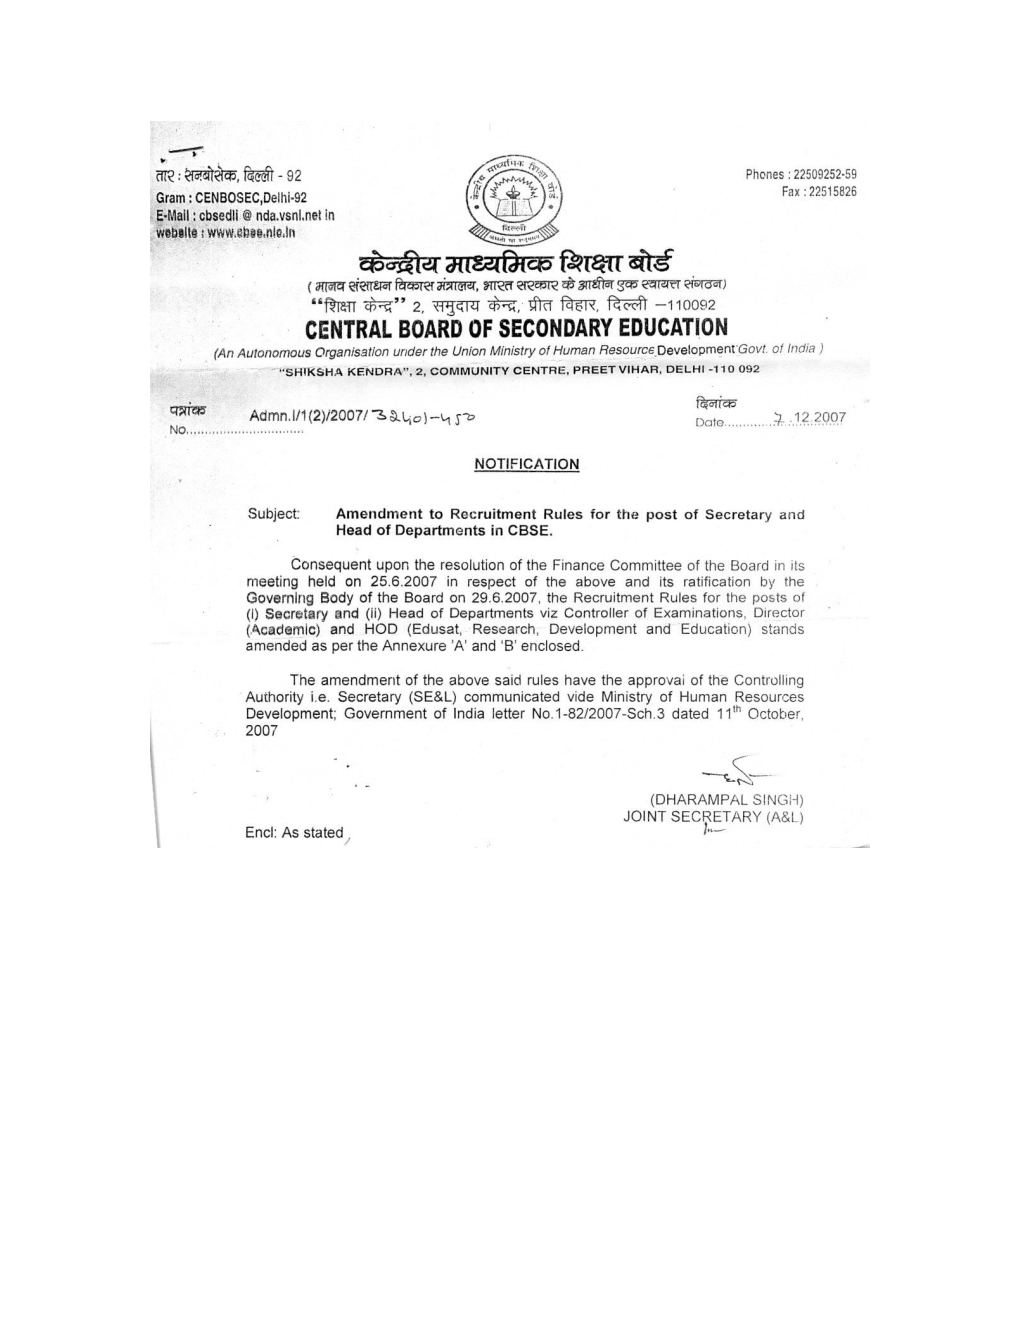 Recruitment Rules for the Post of Secretary, Central Board of Secondary Education